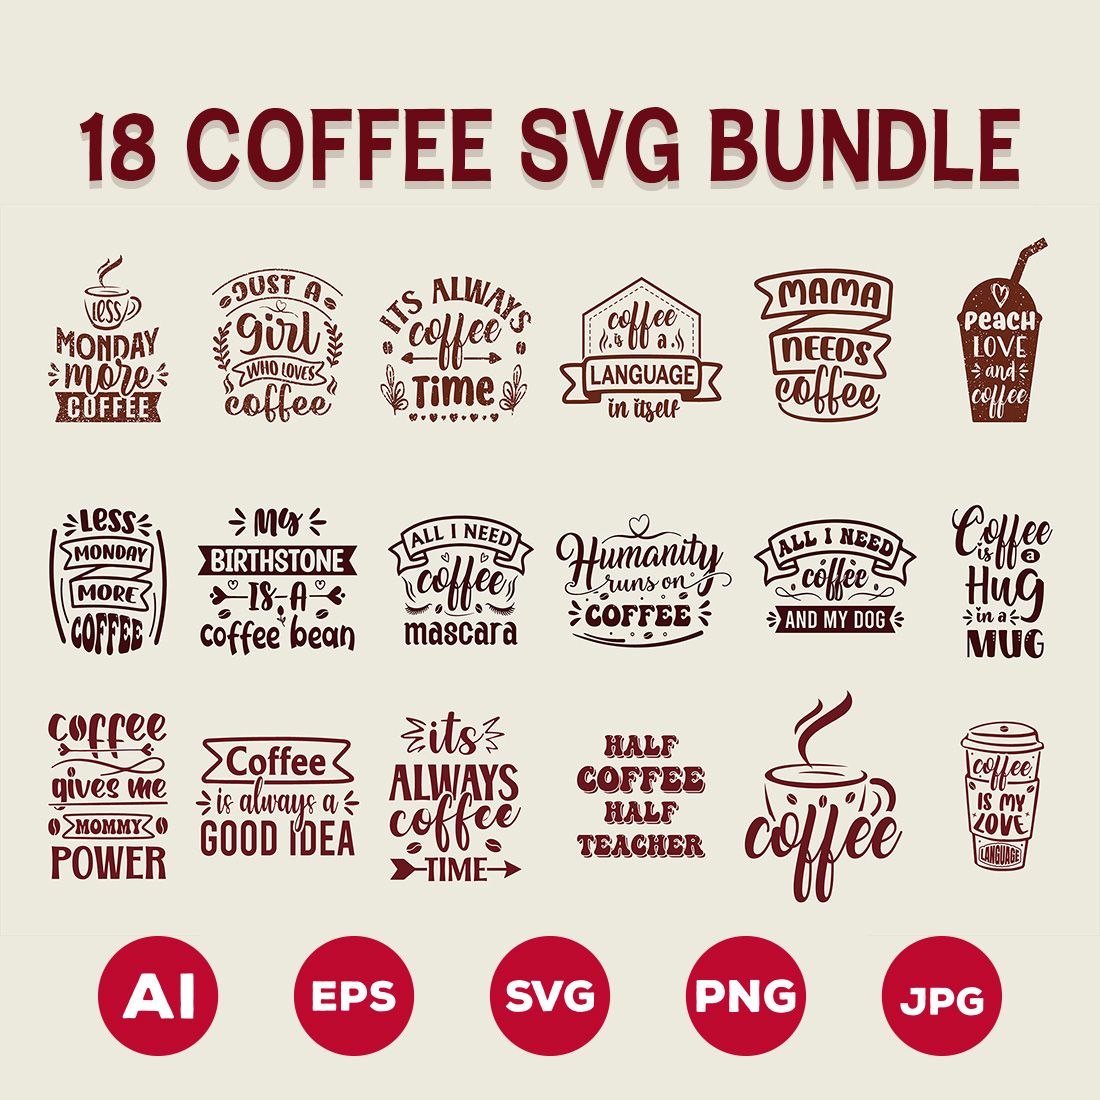 Coffee Quotes SVG Bundle cover image.